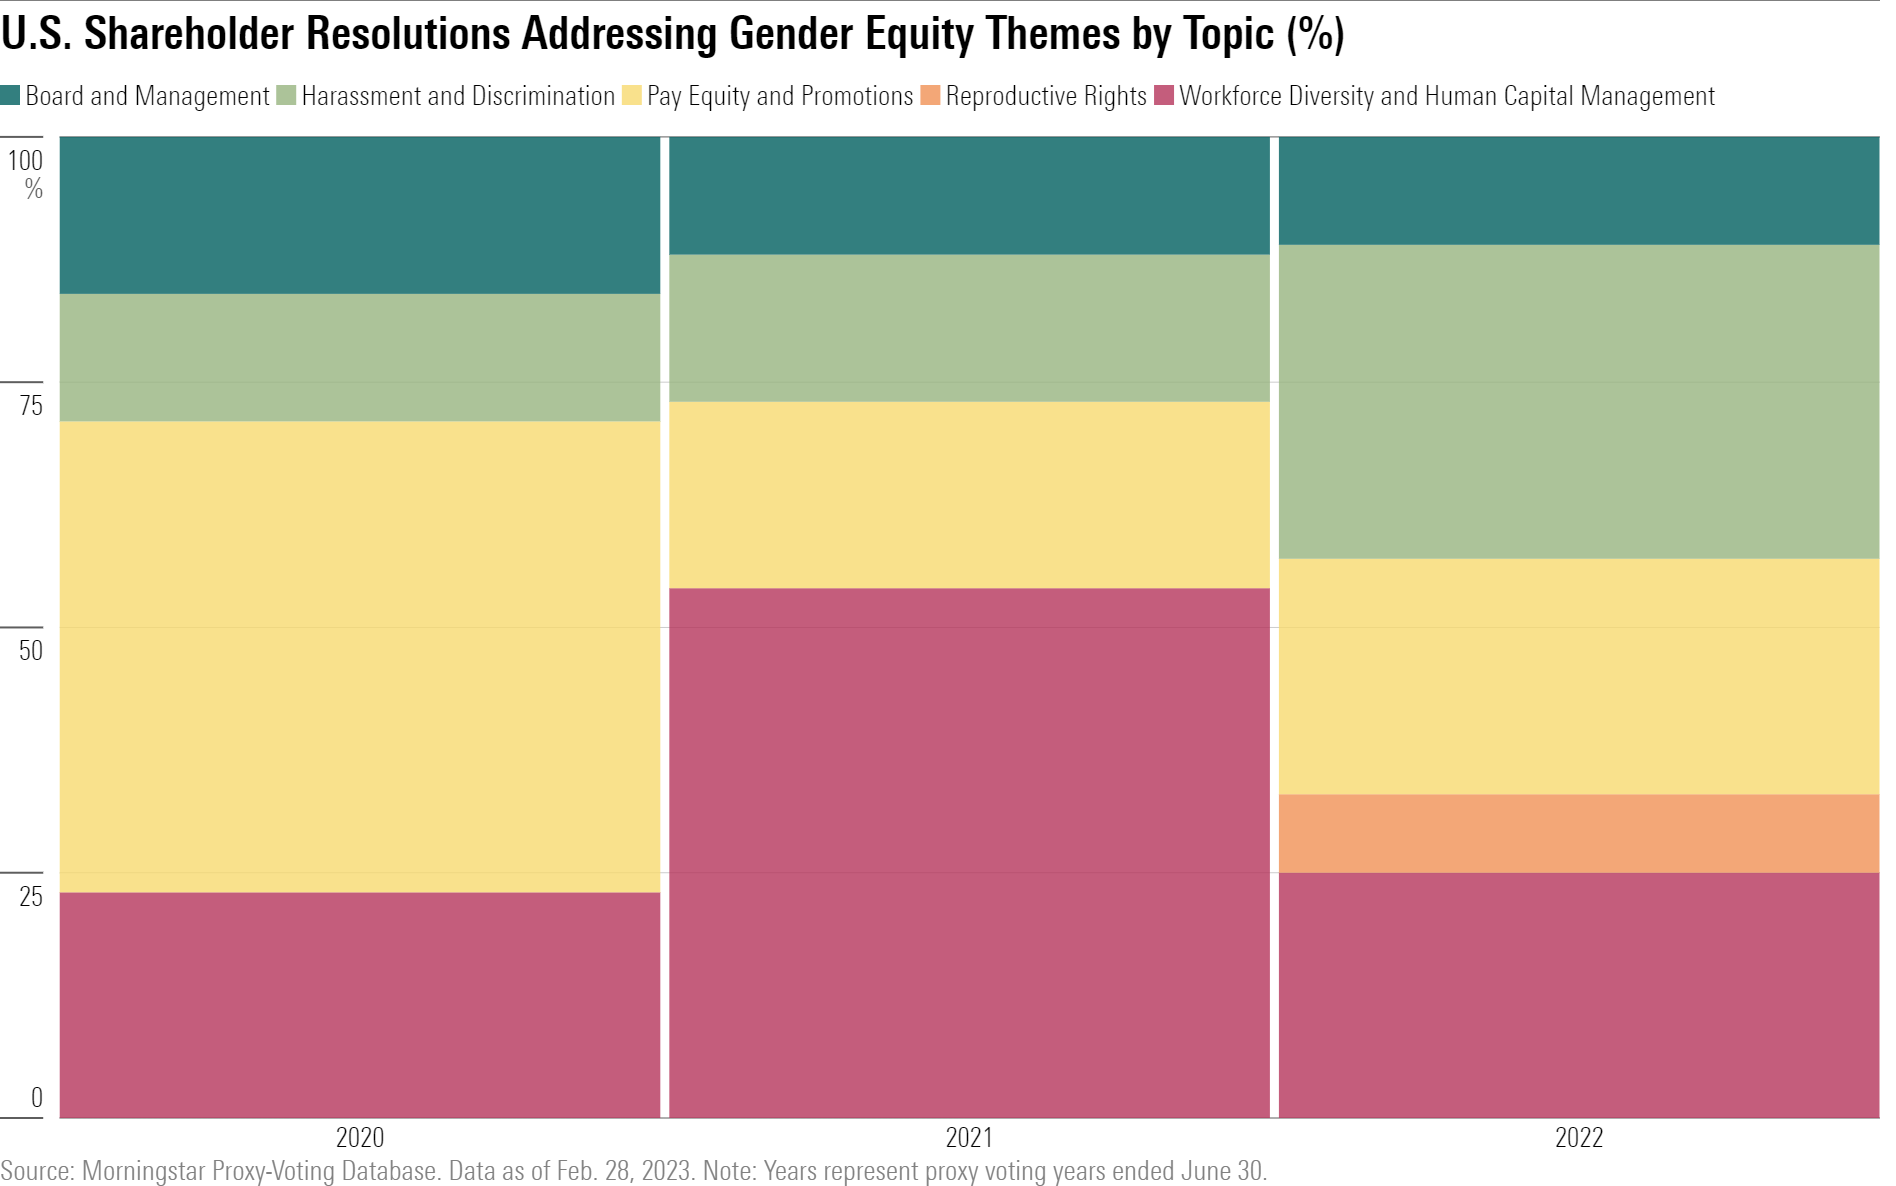 Percentage breakdown bar chart showing that the topics covered by resolutions addressing gender equity have widened over the past three years.